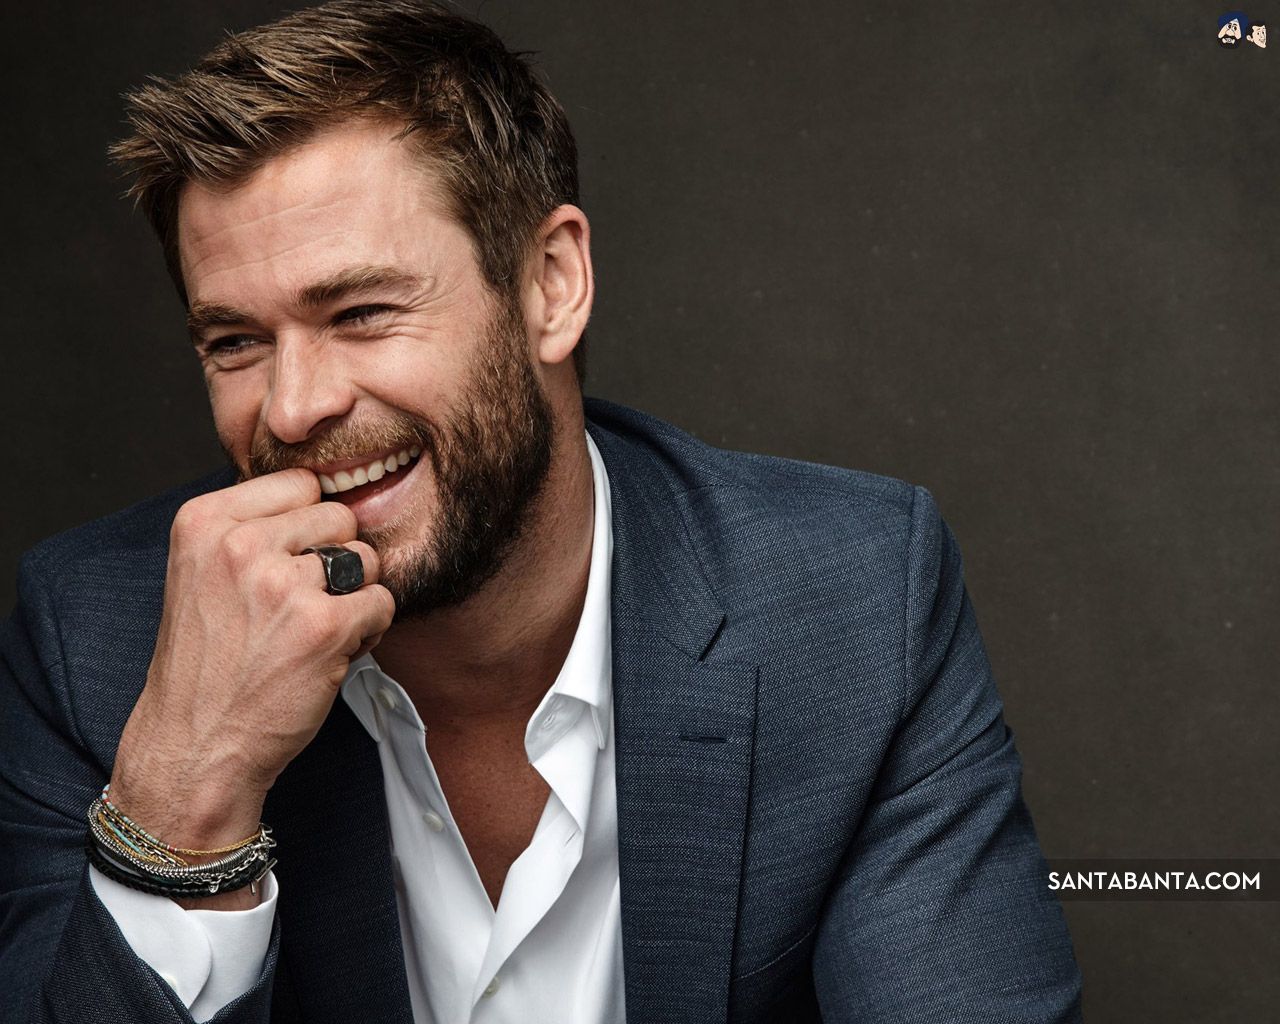 Chris Hemsworth of the most handsome men of Hollywood